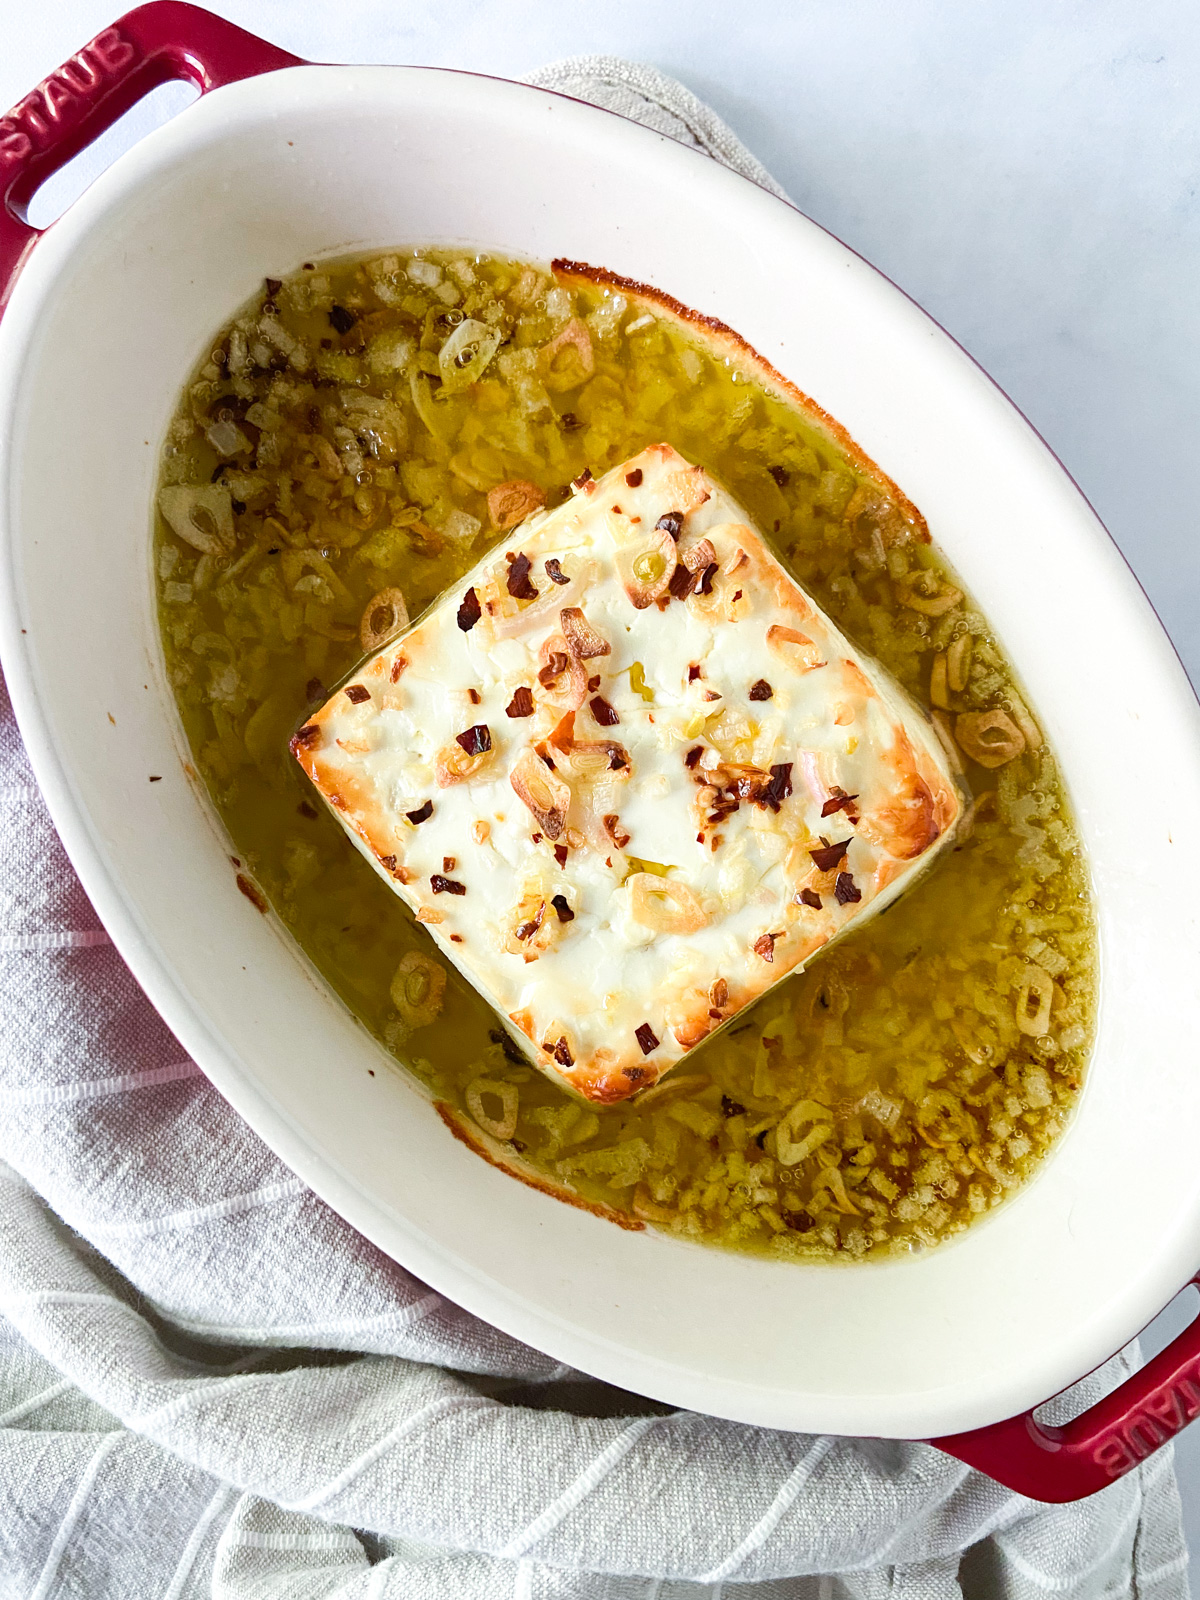 Baked feta with olive oil in a dish.